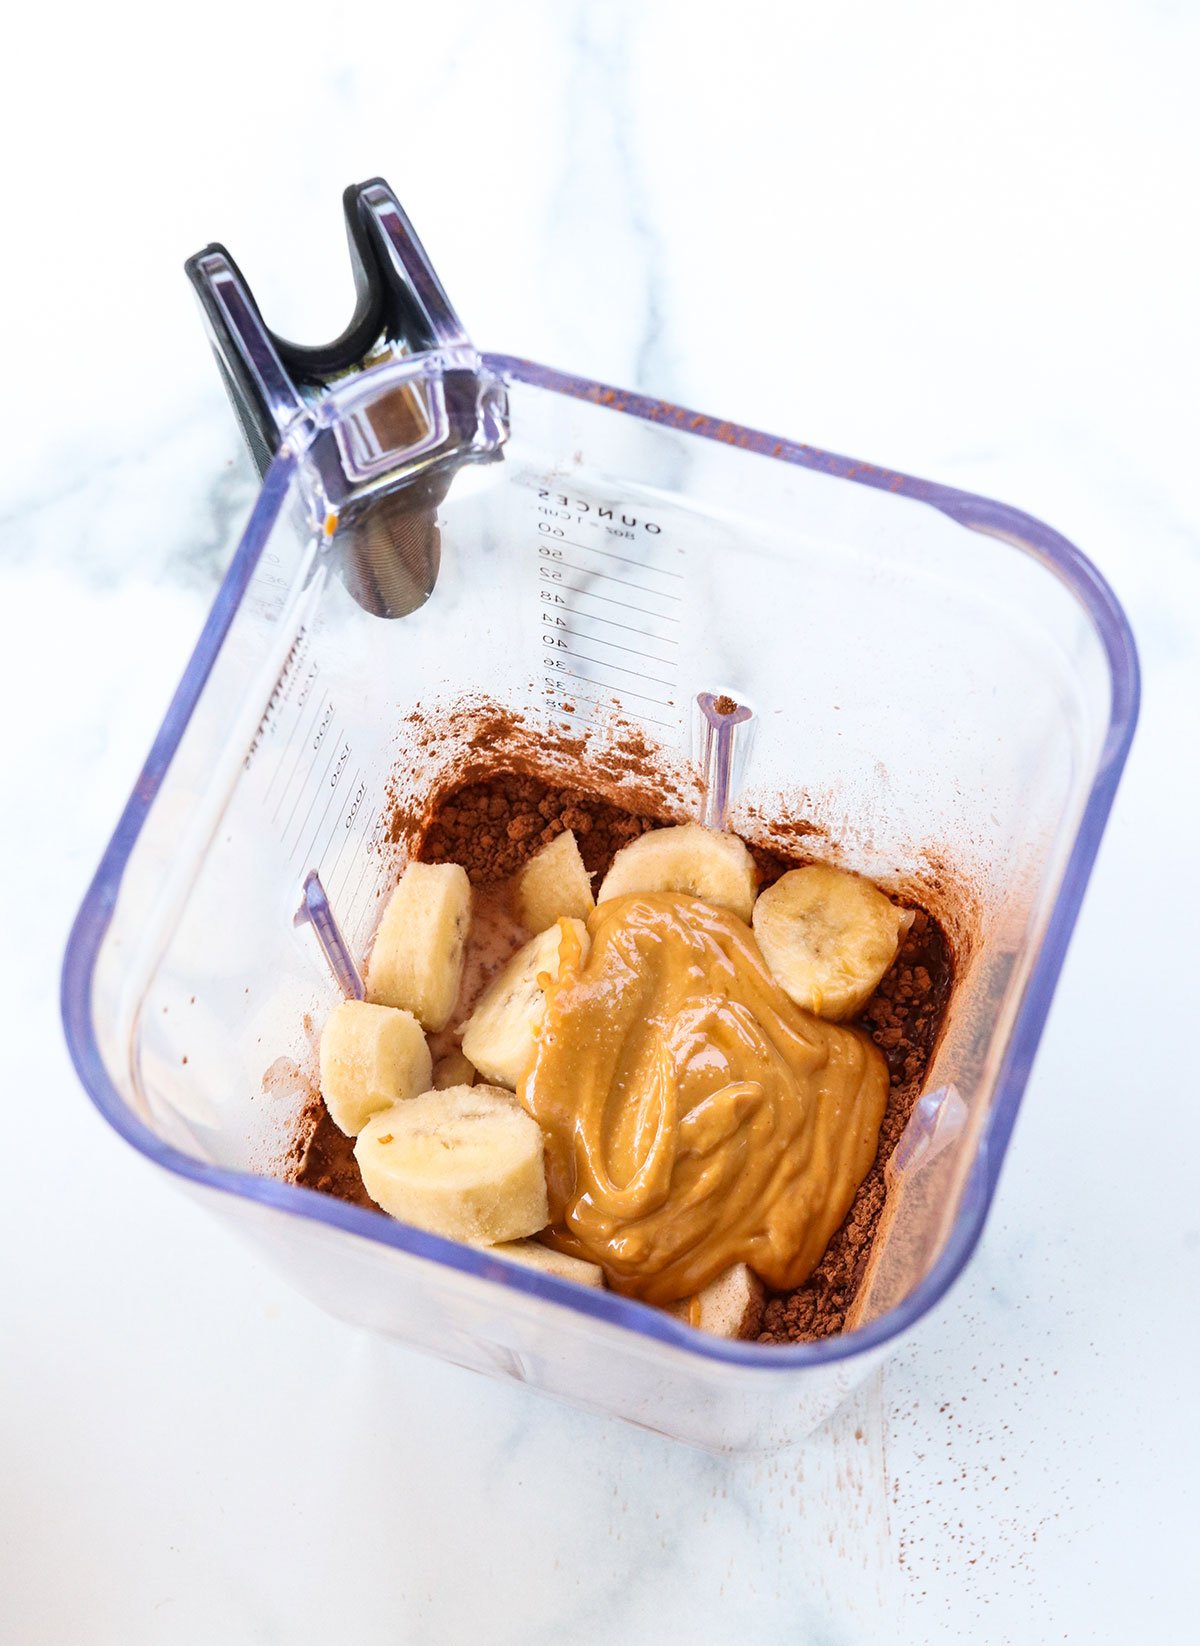 peanut butter, cocoa powder, and frozen bananas in a blender pitcher.